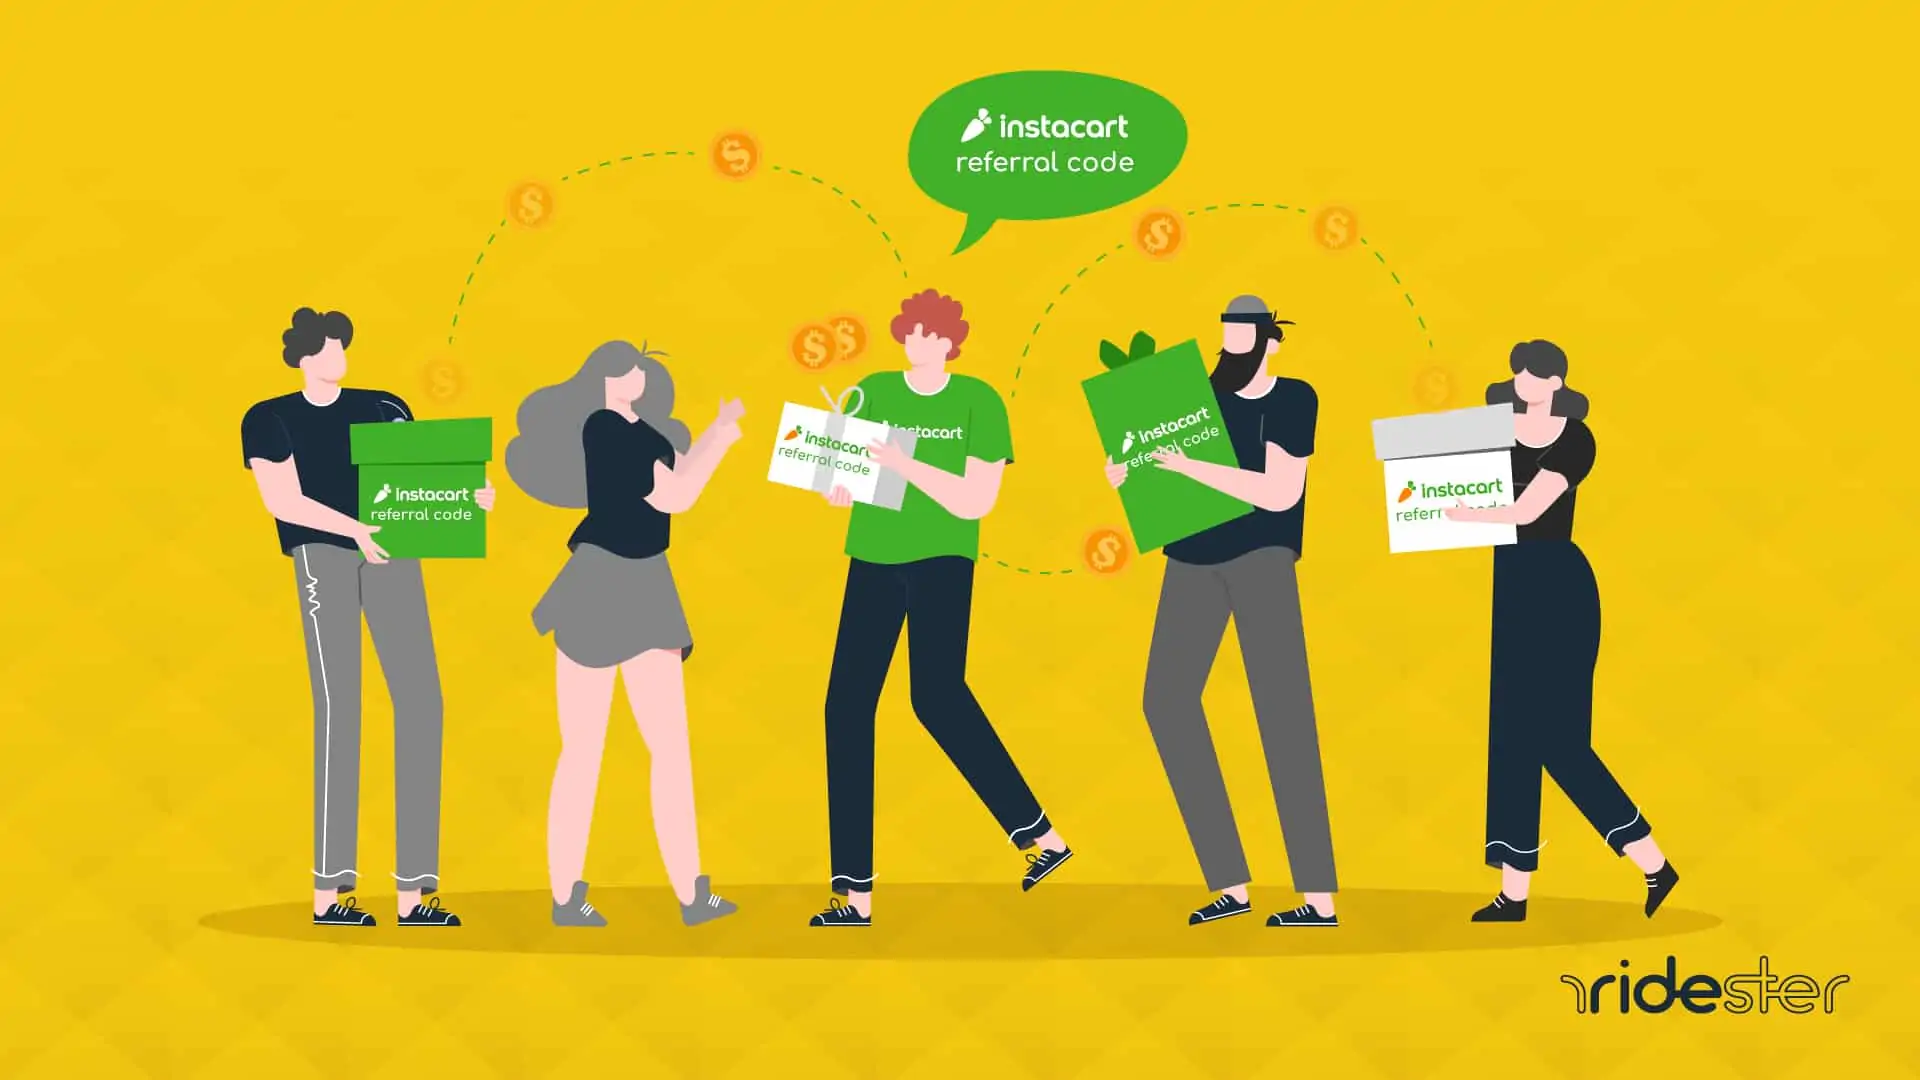 vector graphics showing people carrying boxes around that have the words "instacart referral code" on them